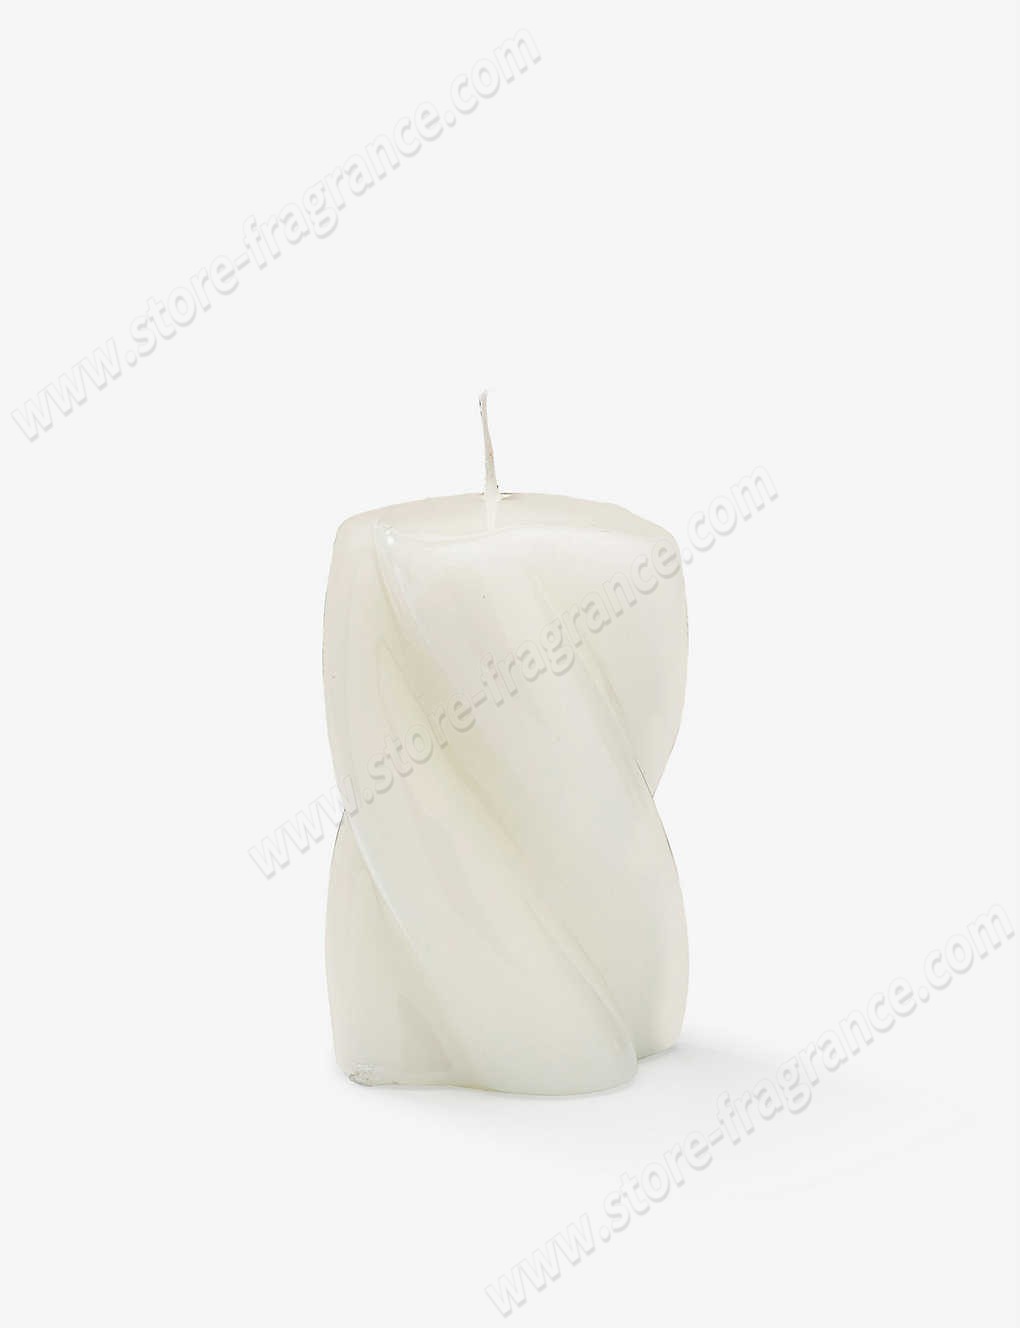 ANNA + NINA/Blunt twisted candle 10cm Limit Offer - -0